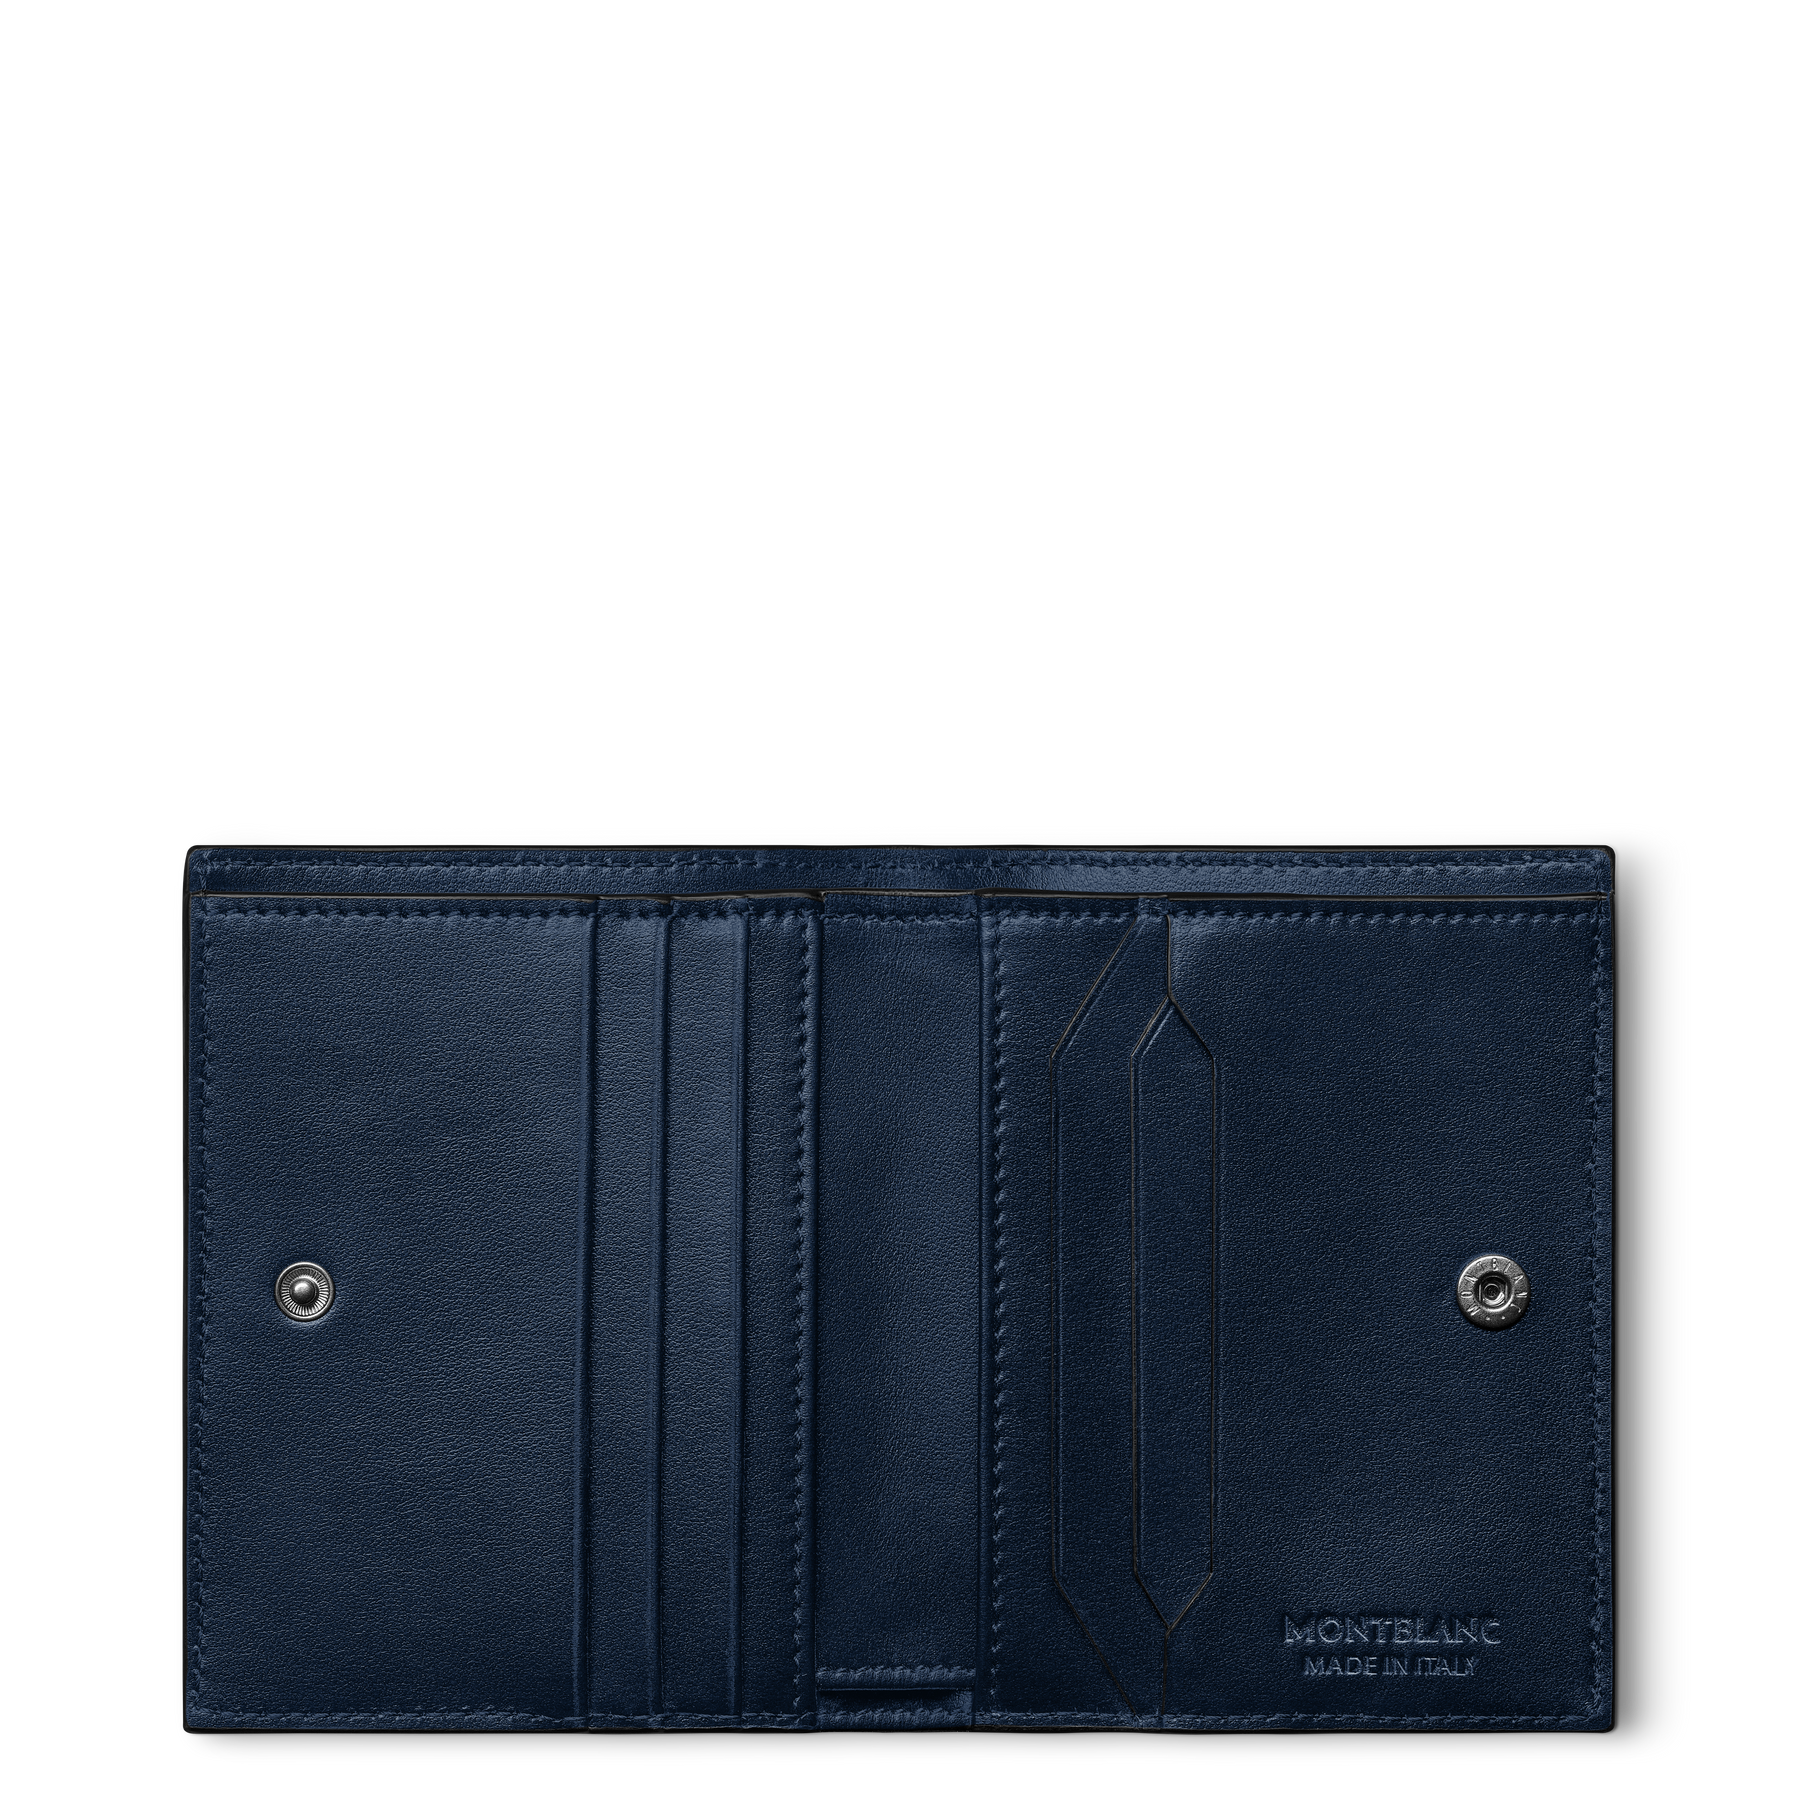 Extreme 3.0 compact wallet 6cc